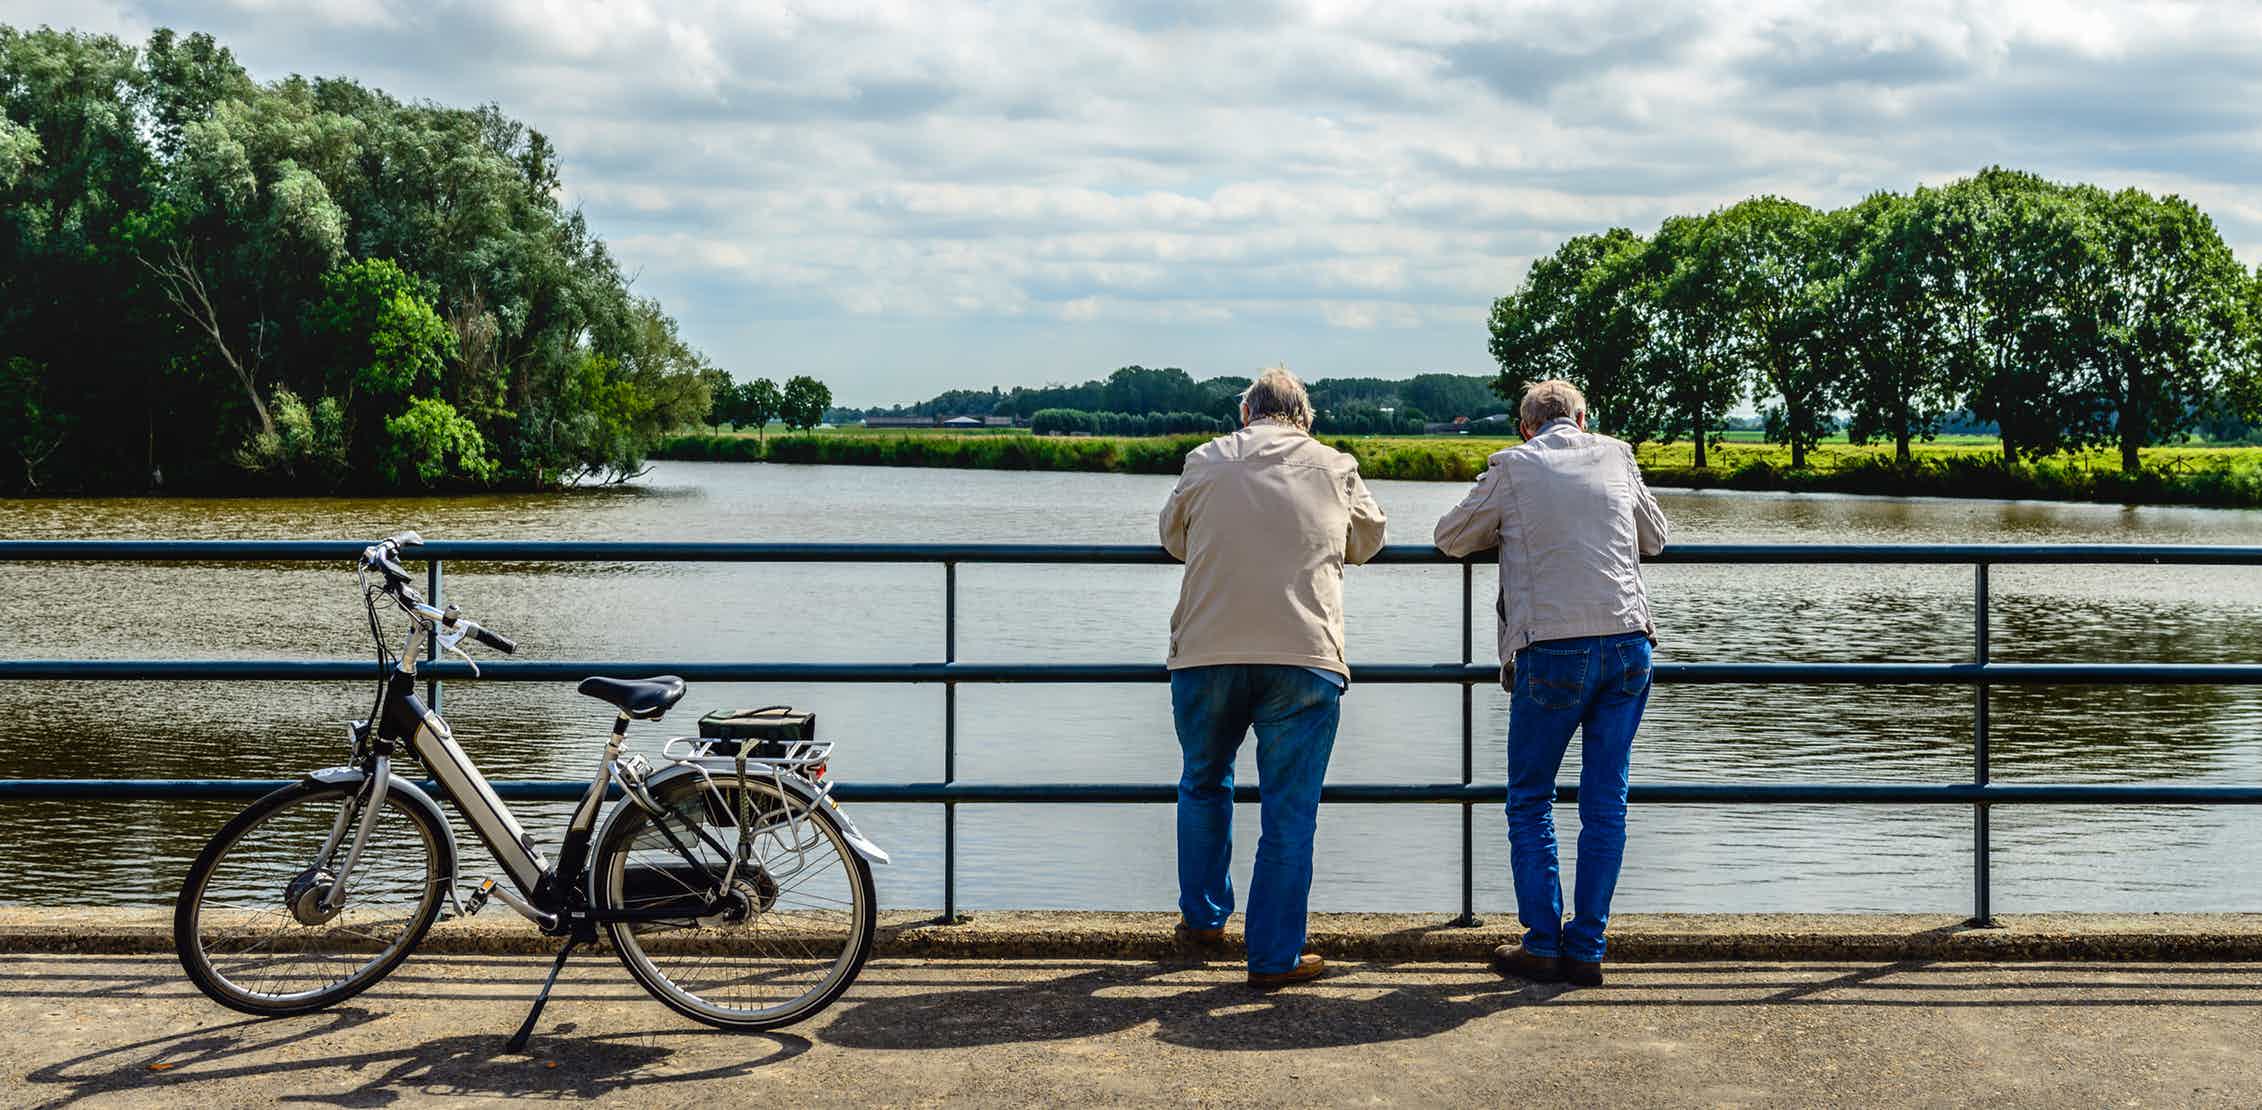 Electric bikes can boost older people's mental performance and well-being